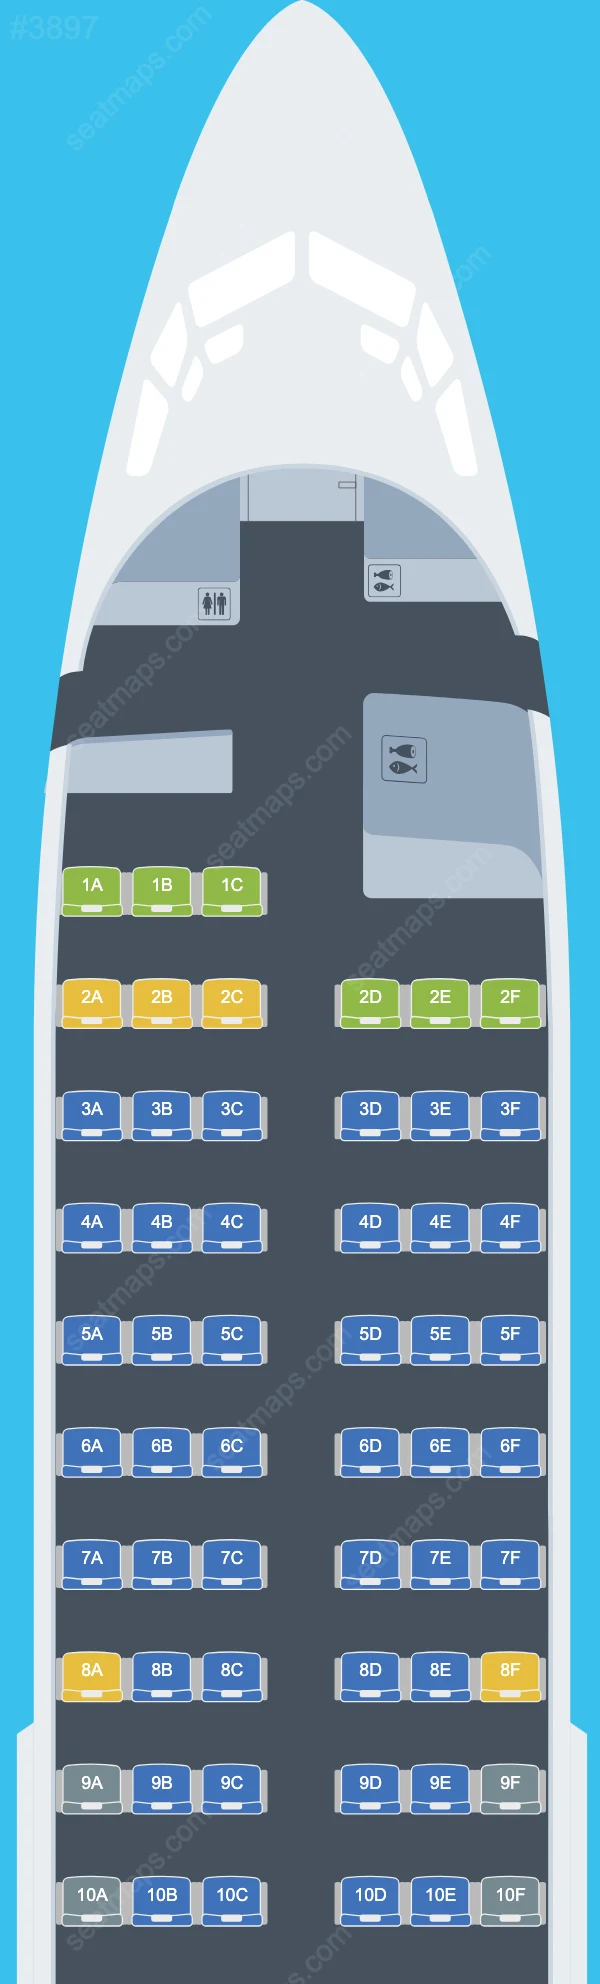 Luxair Boeing 737 Seat Maps 737-700